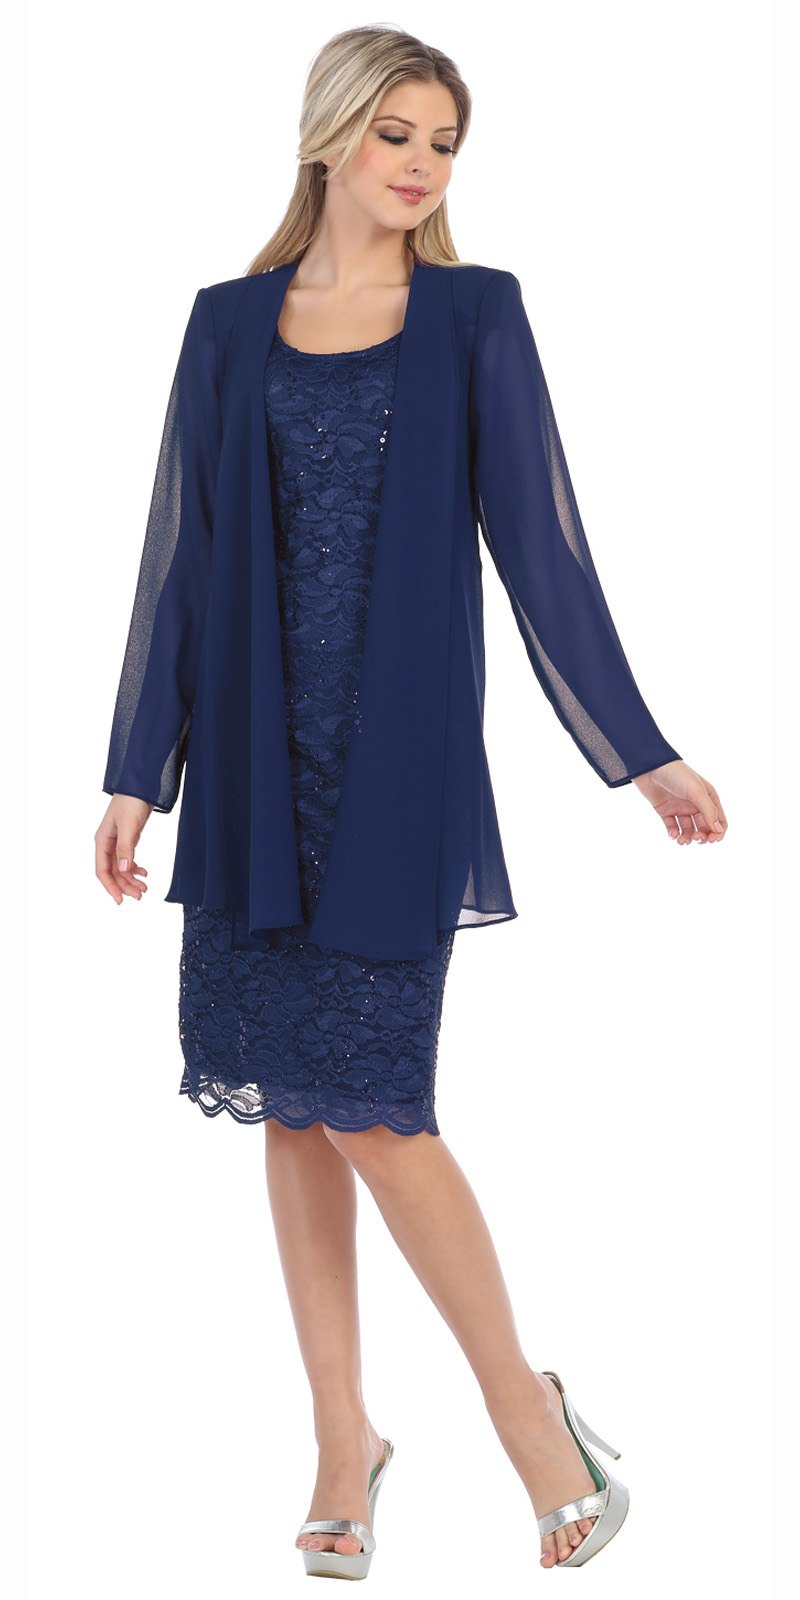 Lace Knee Length Semi Formal Dress with Long Sleeve Jacket Navy Blue